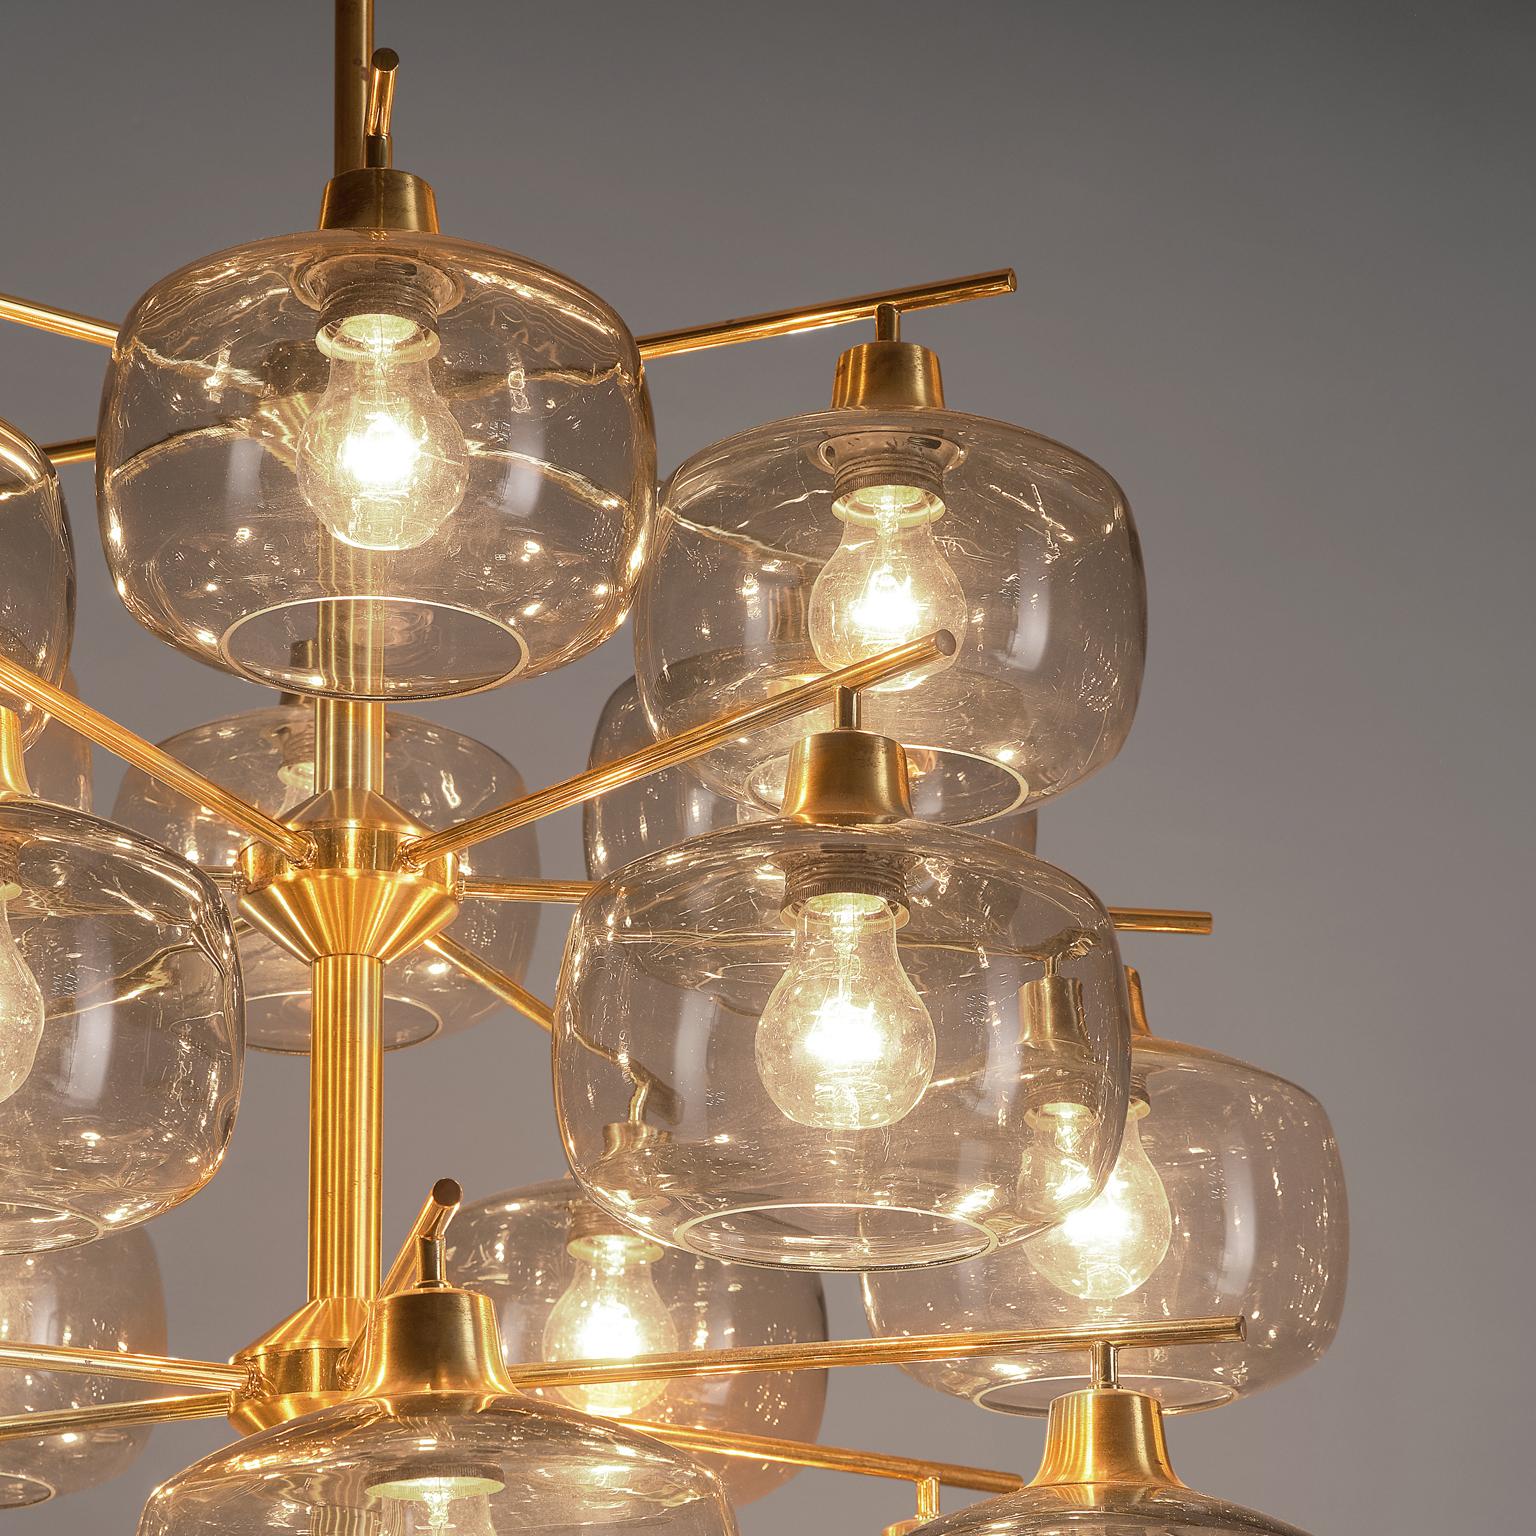 Pair of Swedish Chandeliers by Holger Johansson, 1952 1